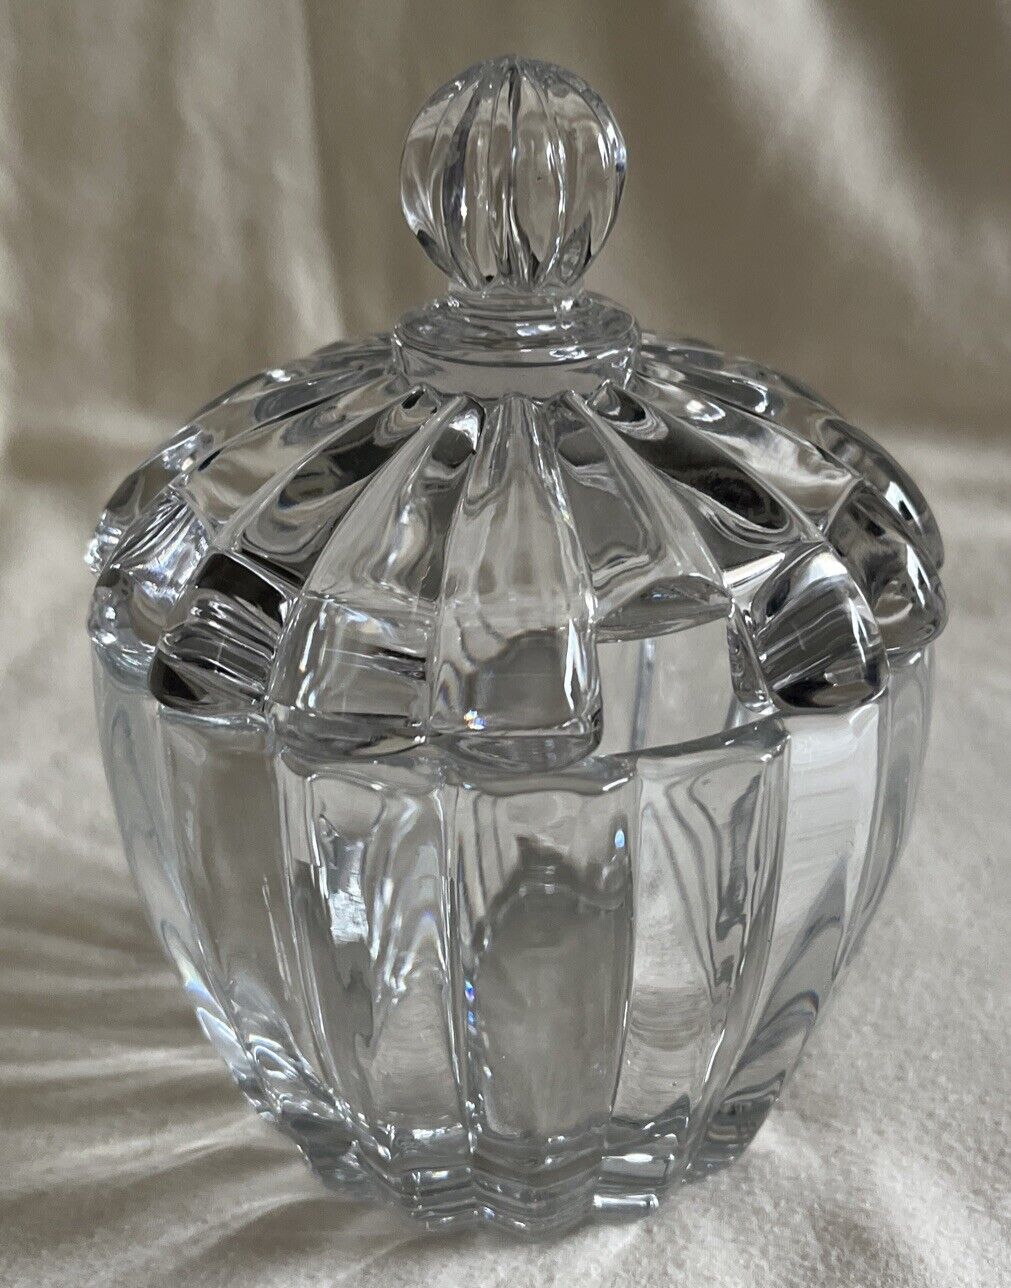 Vintage Heisey Clear Glass Crysolite Jam Jelly Jar / Sugar Bowl with Lid